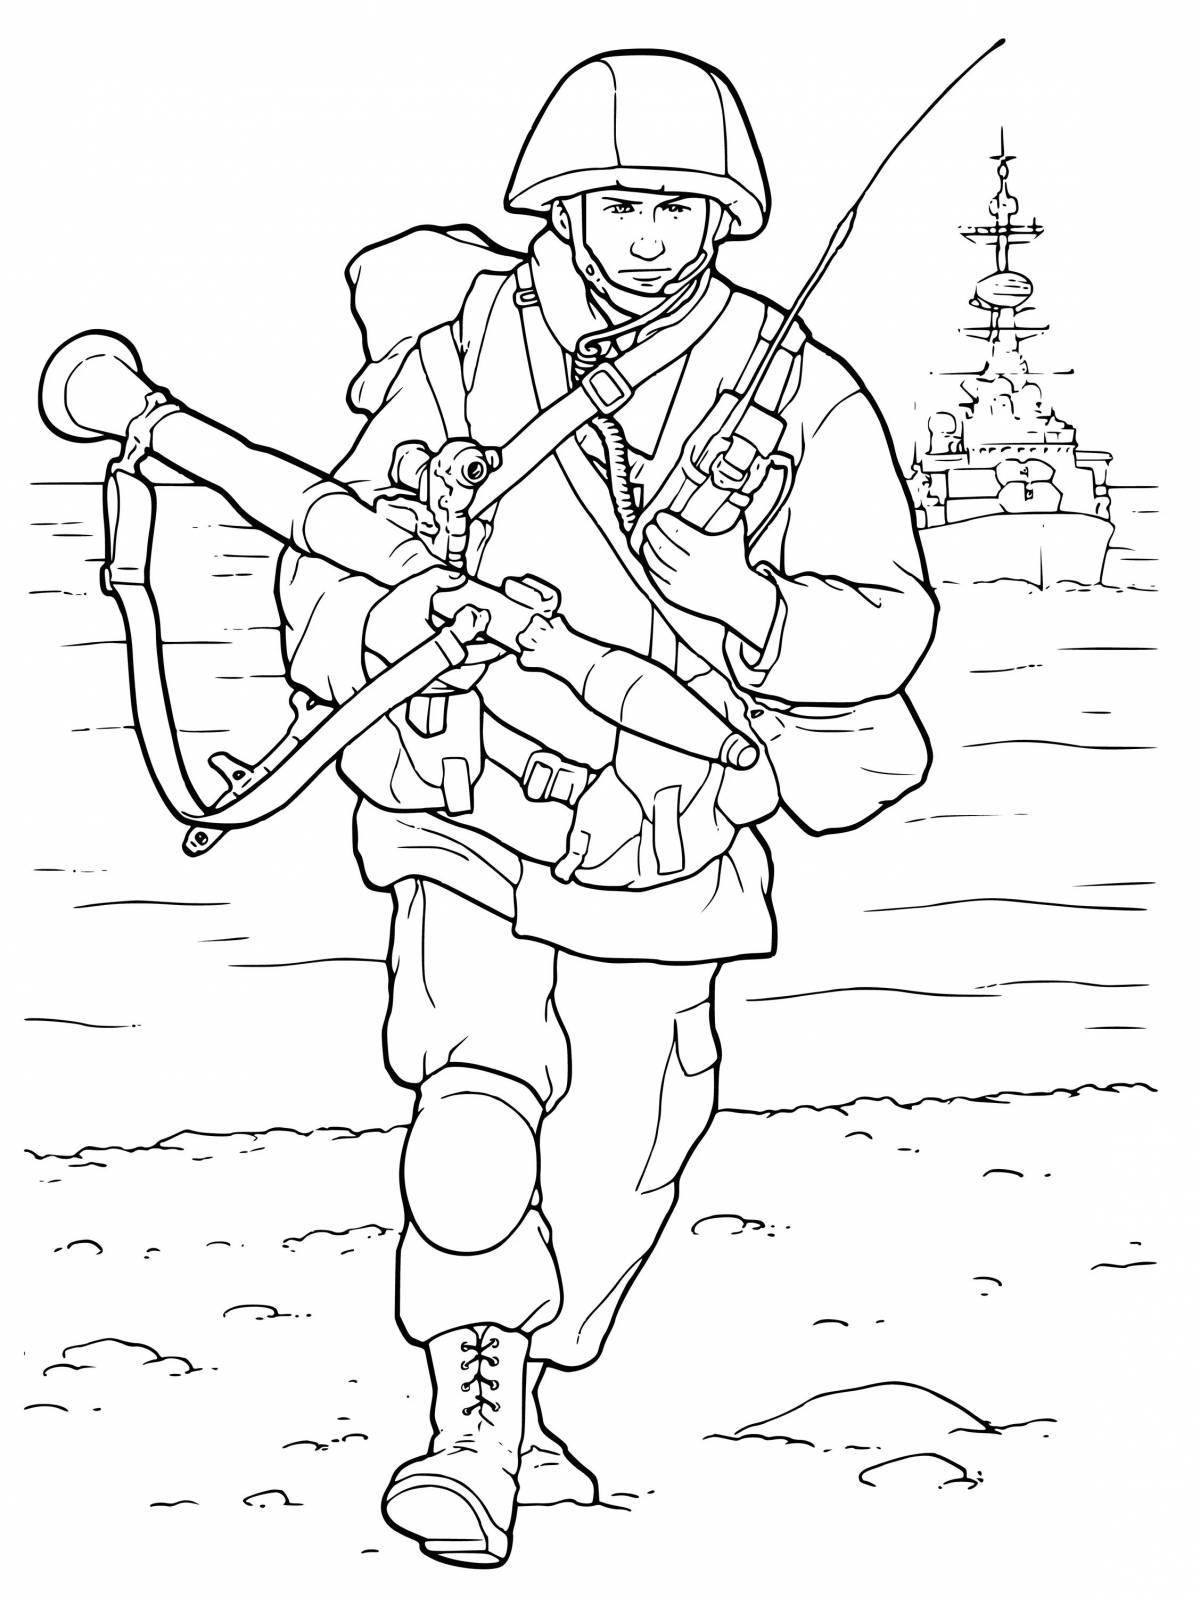 Coloring book famous Russian soldier